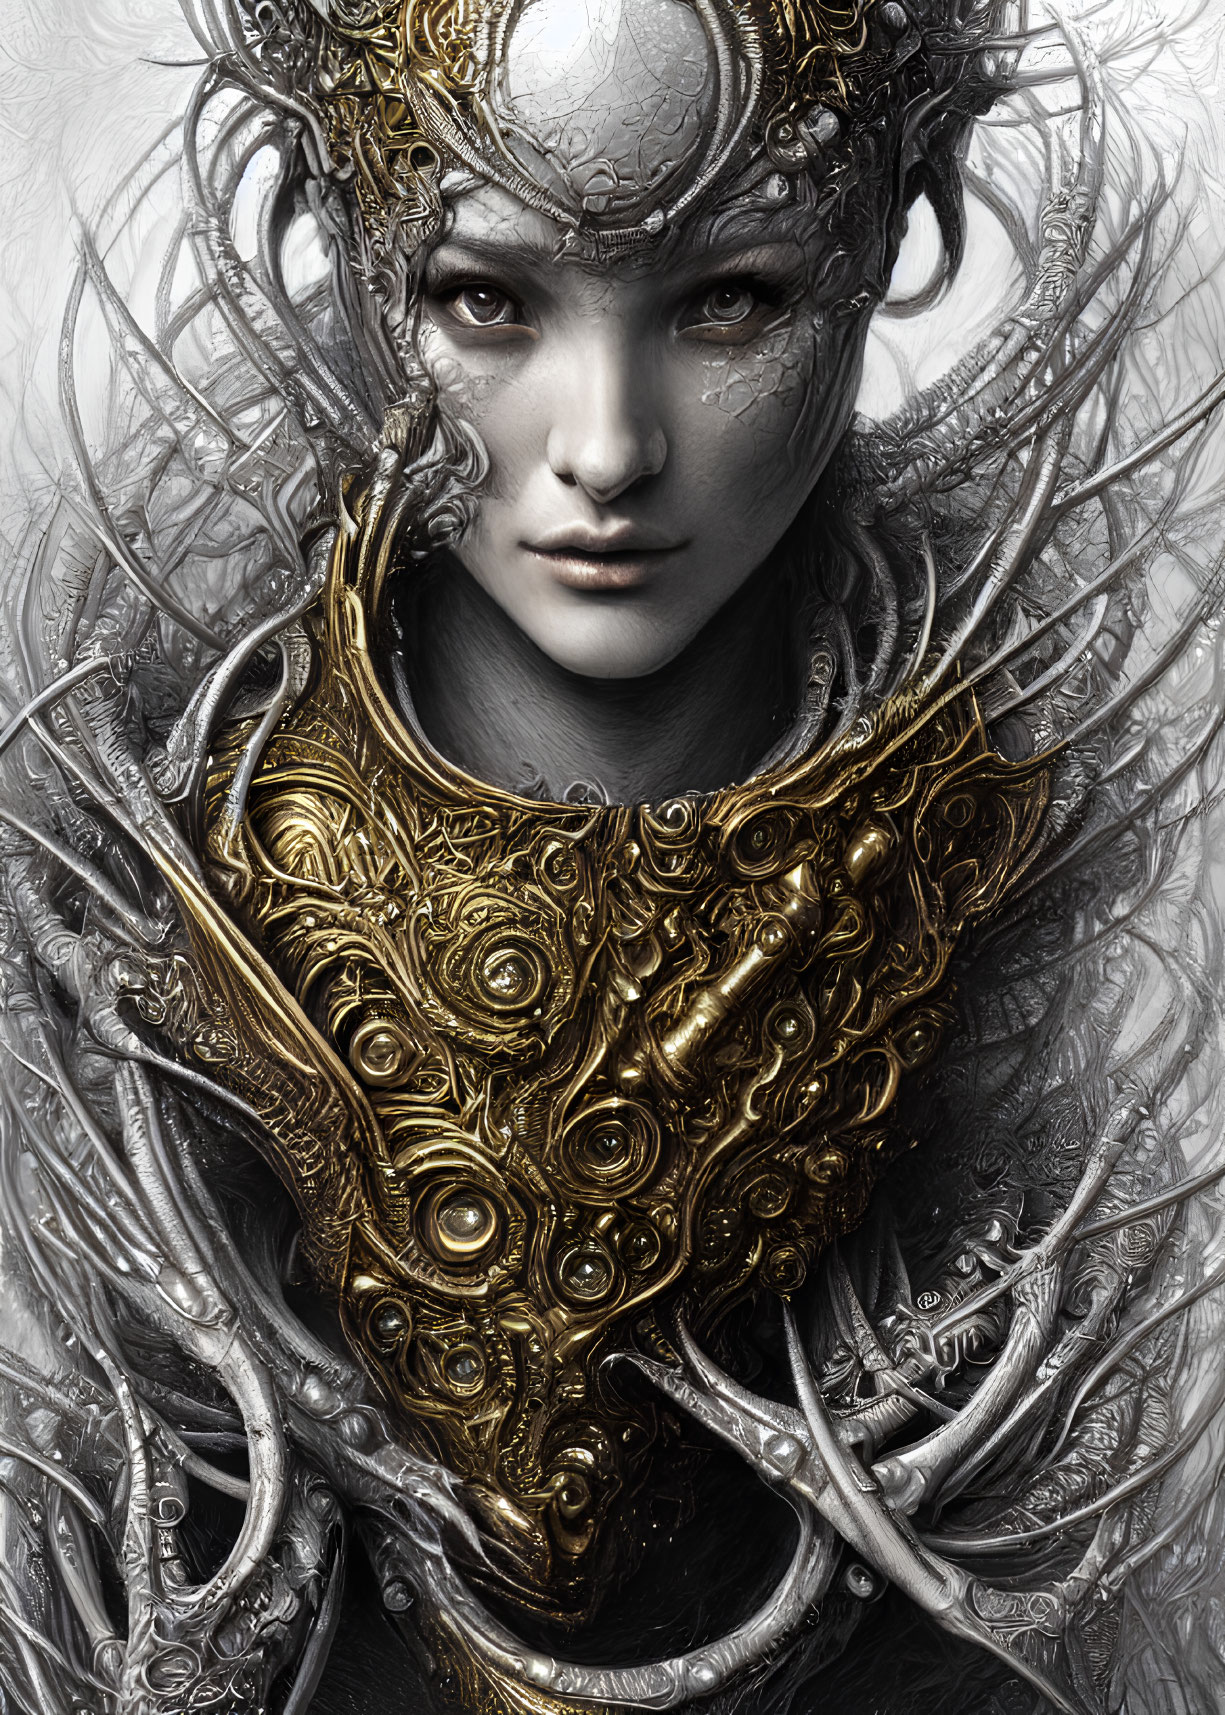 Detailed Illustration: Person in Golden Armor with Ornate Headpiece Amidst Silver Branches